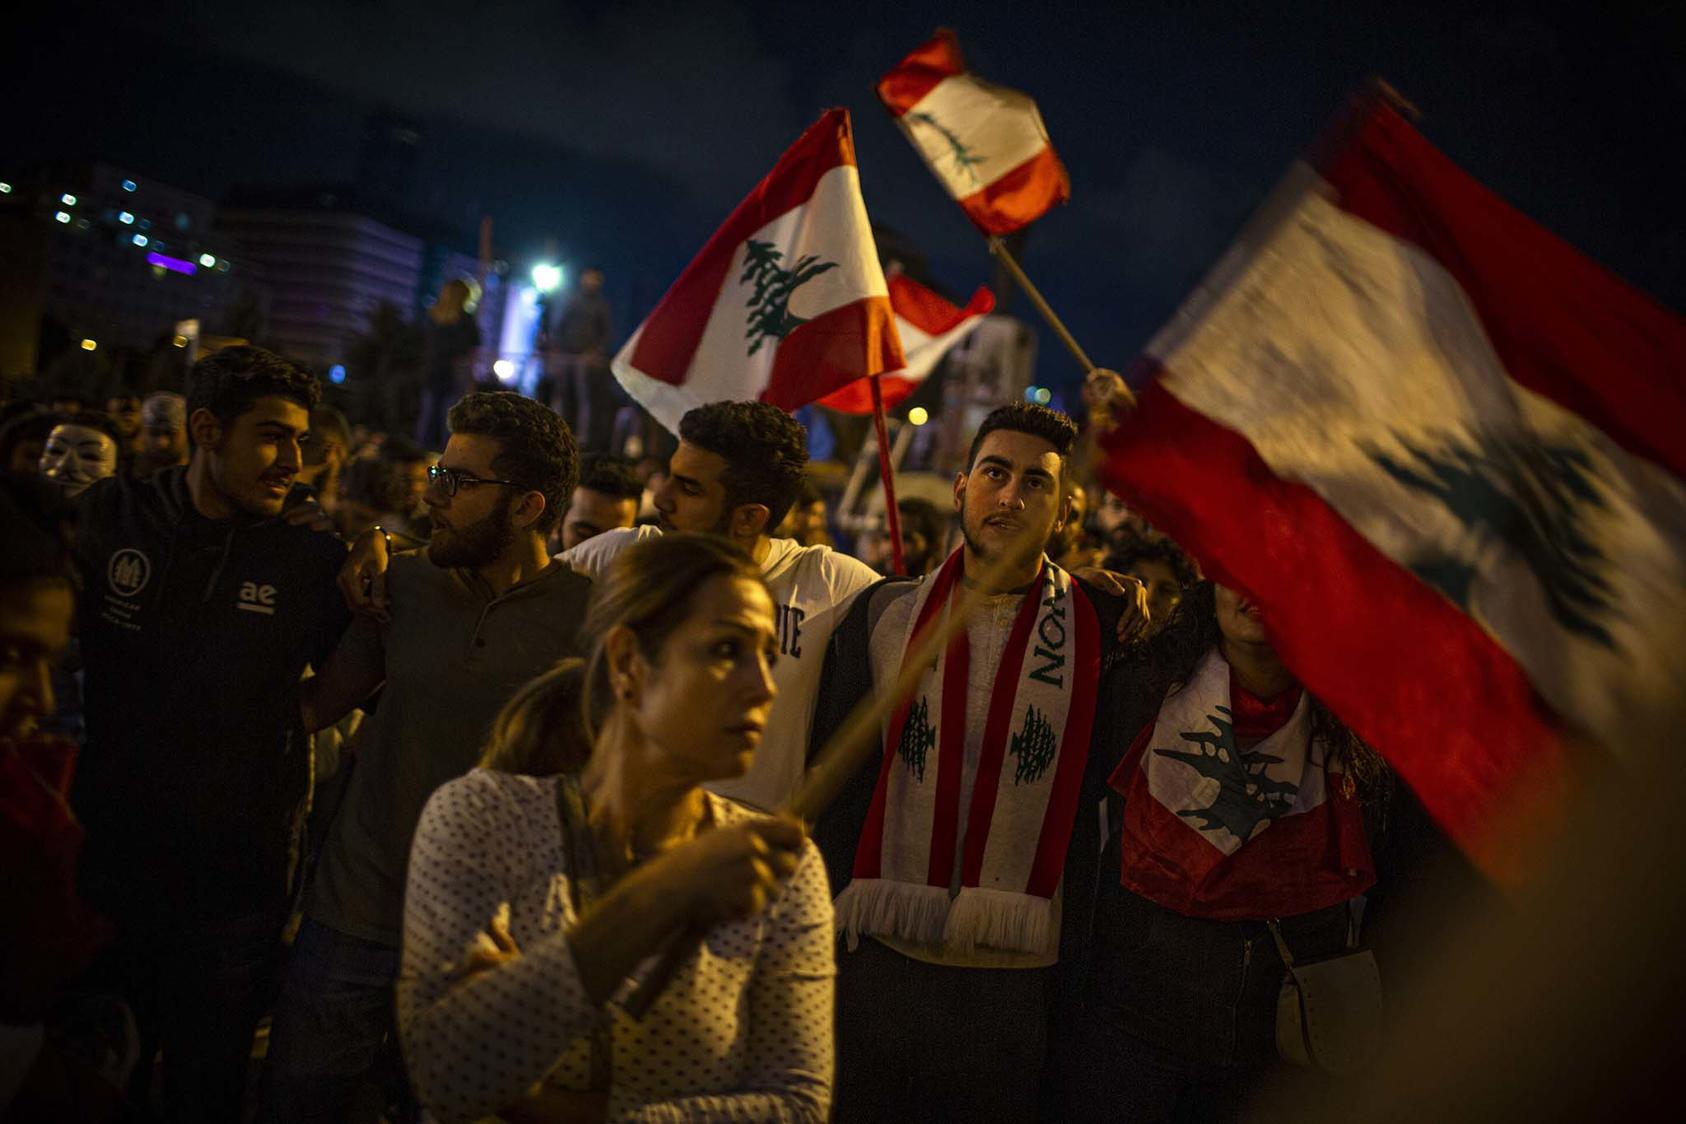 Anti-government protesters wave the flag of Lebanon as they gather in Martyr's Square in Beirut on Tuesday night, Oct. 29, 2019. (Diego Ibarra Sanchez/The New York Times)